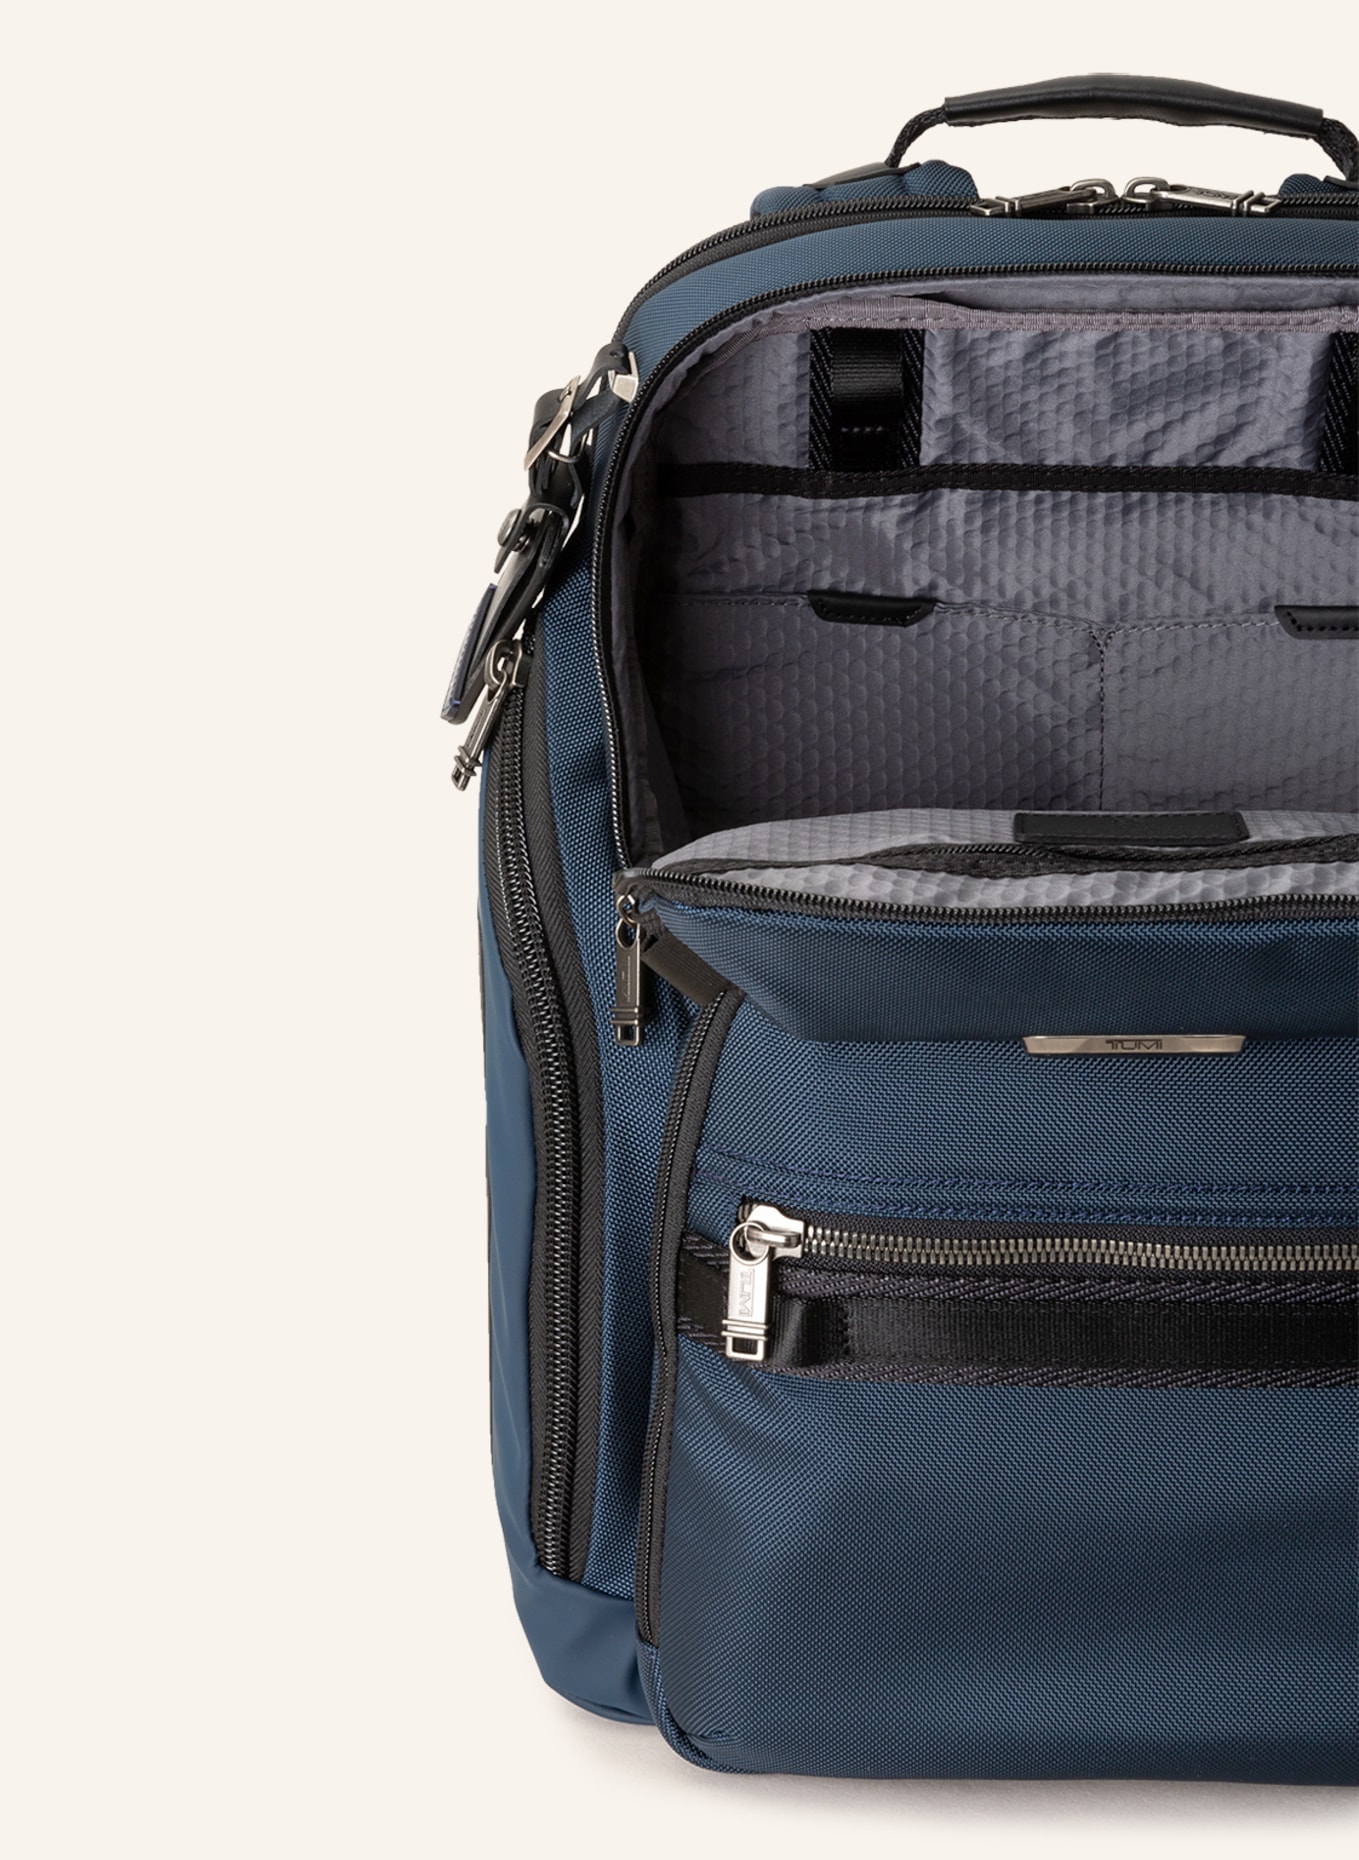 TUMI ALPHA BRAVO backpack SEARCH with laptop compartment in dark blue